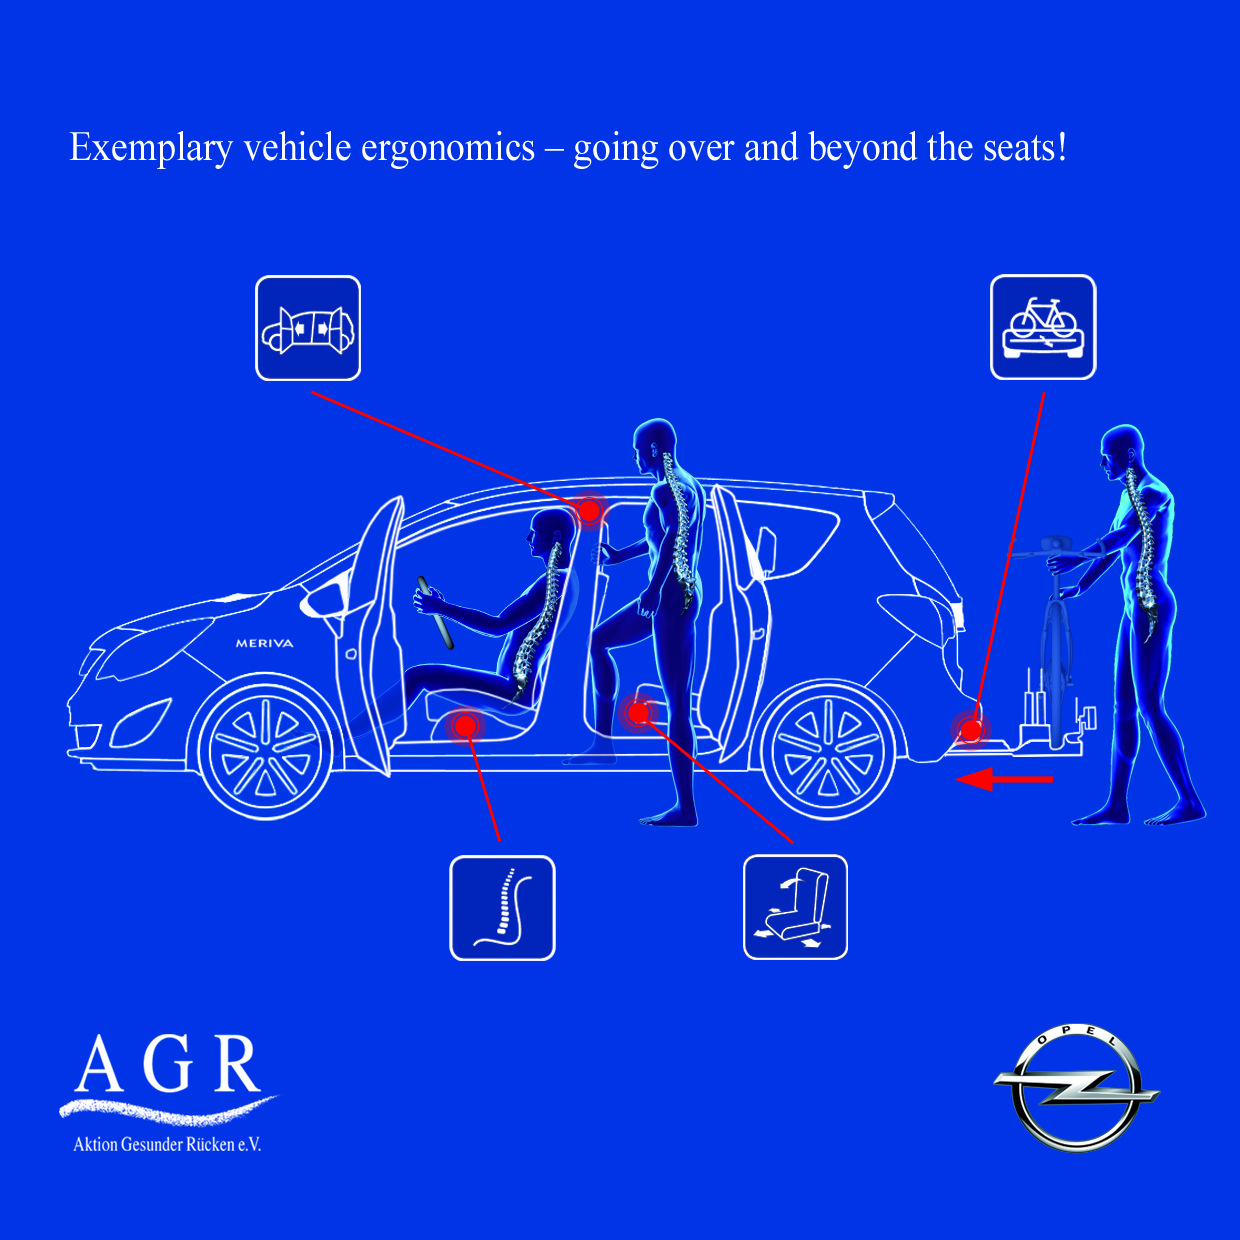 Think of your back when driving your car: the importance of ergonomic